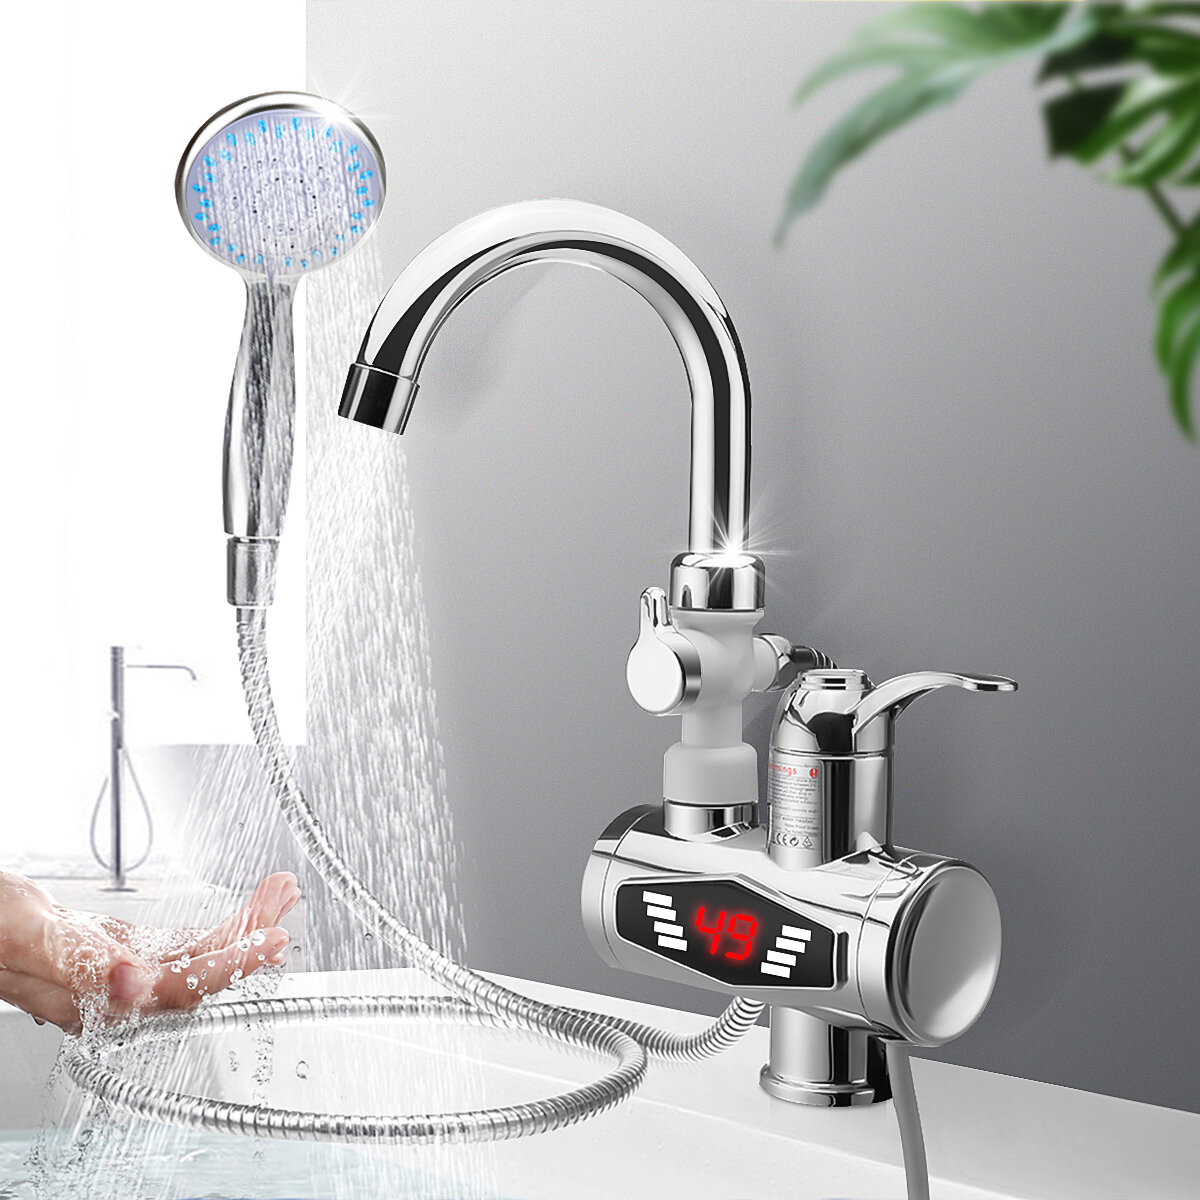 

3000W 220V 3s Fast Heat 360 Degree Rotation Temp Display Electric Faucet Tap Hot With Shower